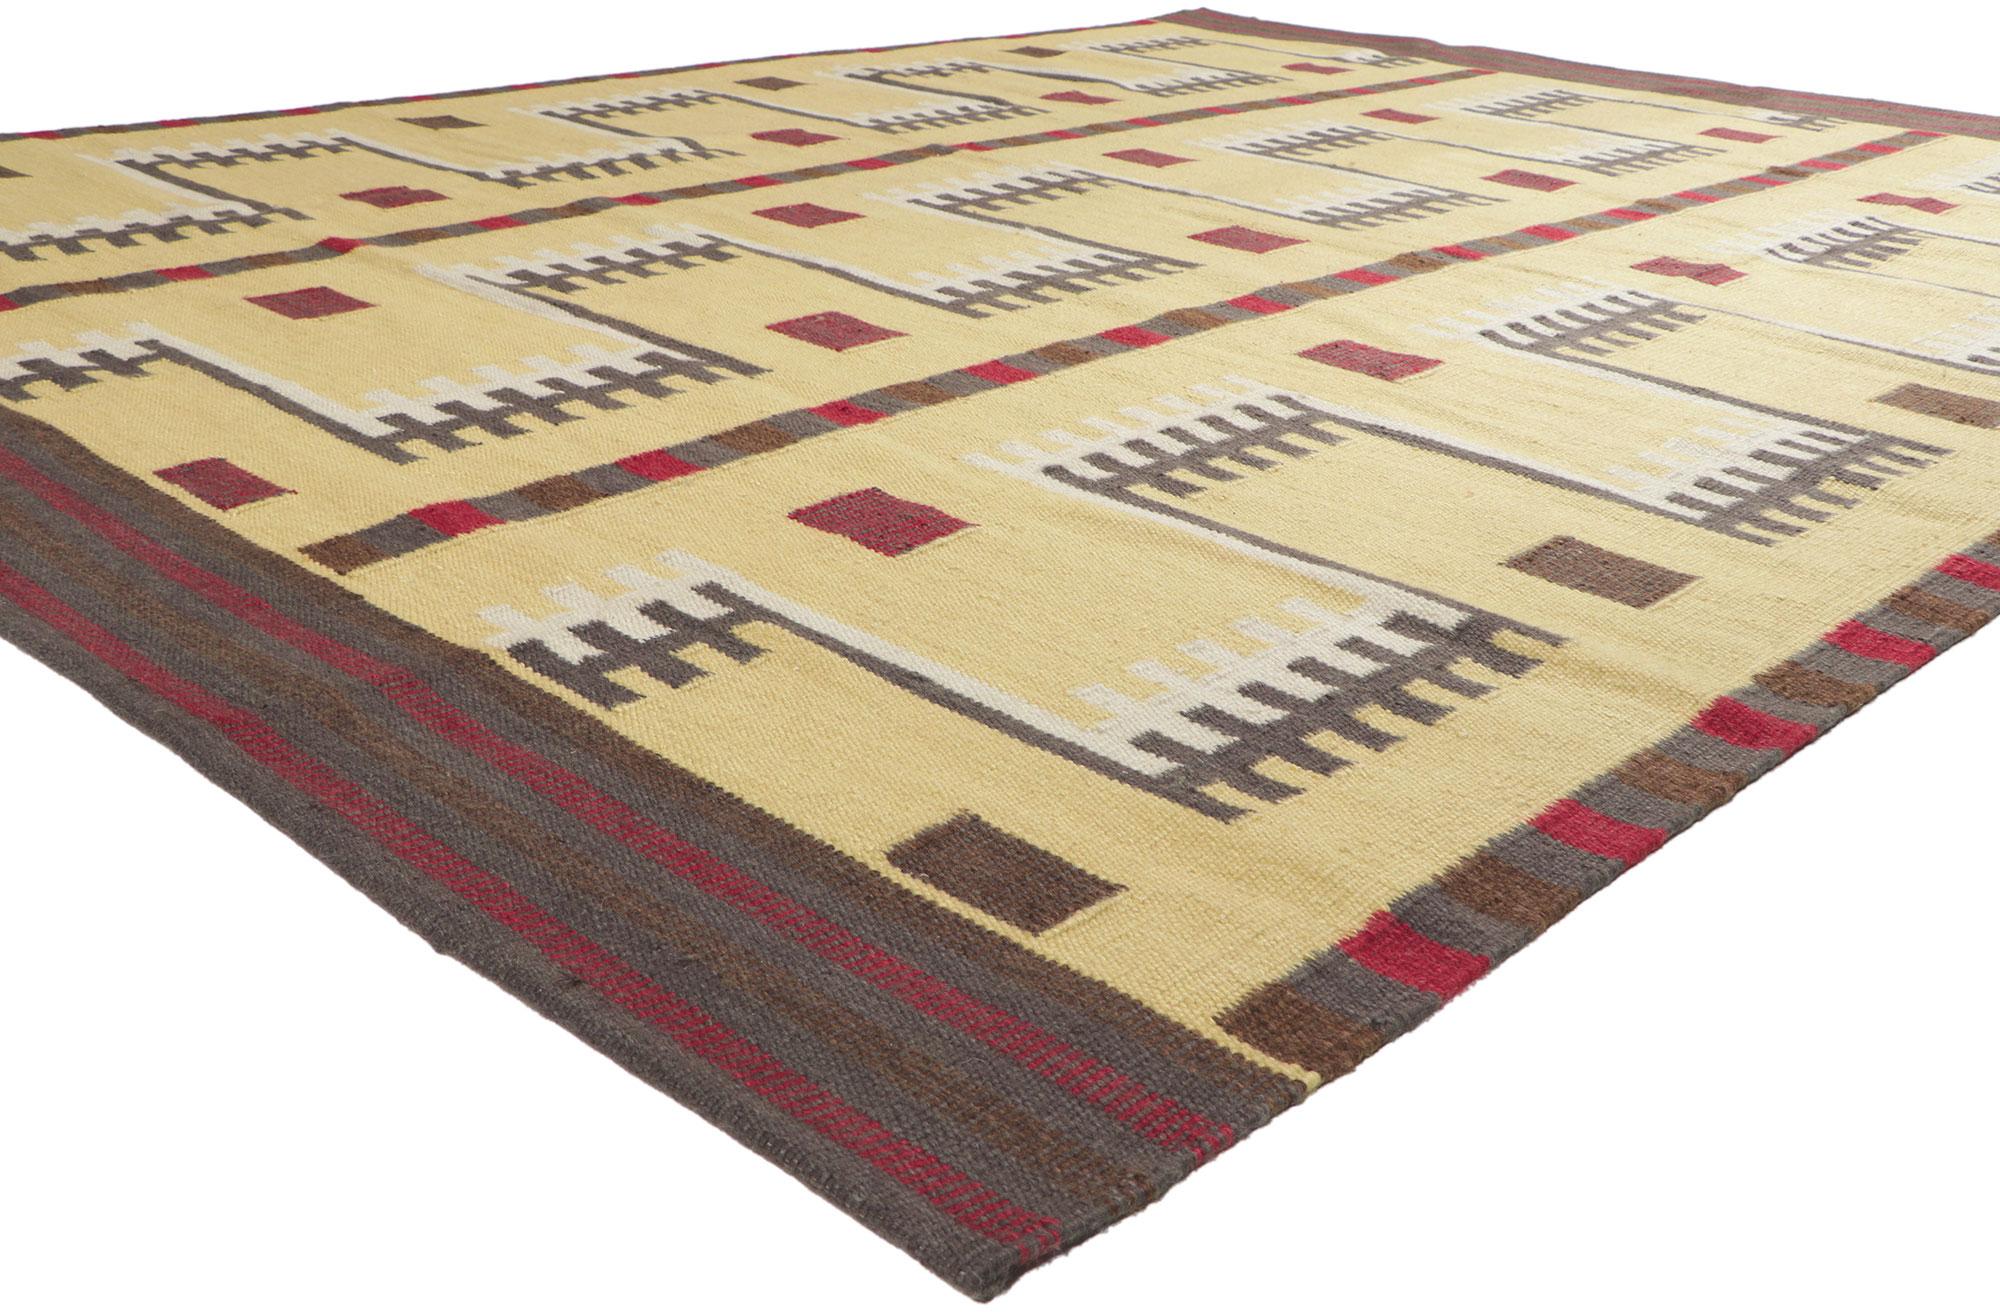 30961 New Swedish Inspired Kilim Rug, 09'02 x 11'10. ?Showcasing the bolder side of Scandinavian design, this handwoven Swedish style kilim rug is a captivating vision of woven beauty. The eye-catching geometric design and blue hues woven into this